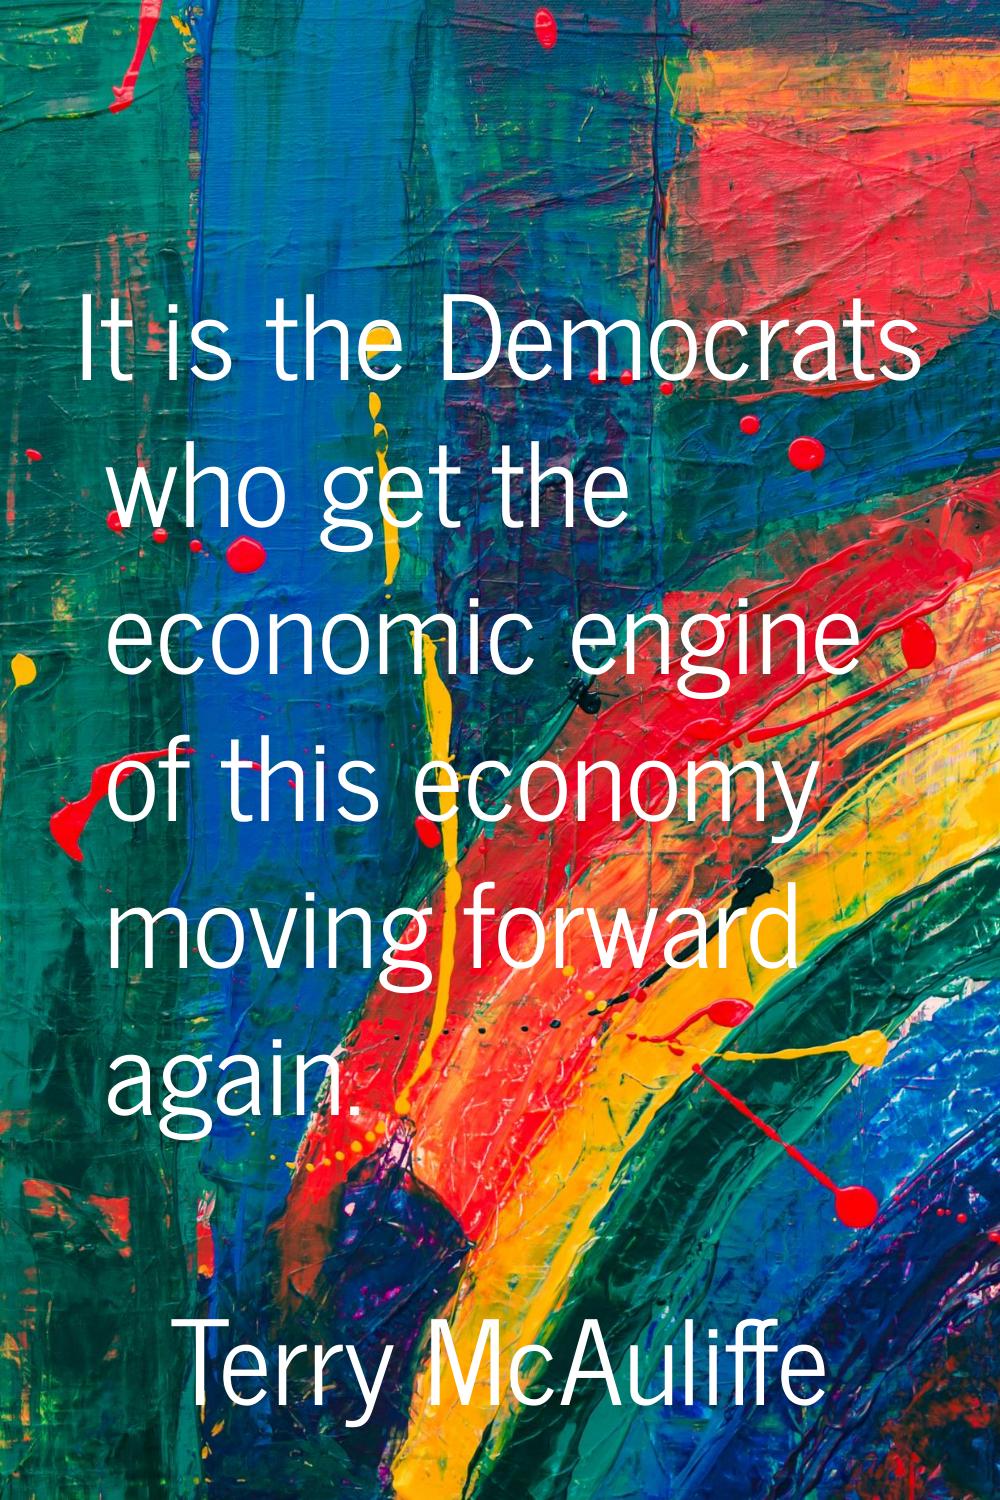 It is the Democrats who get the economic engine of this economy moving forward again.